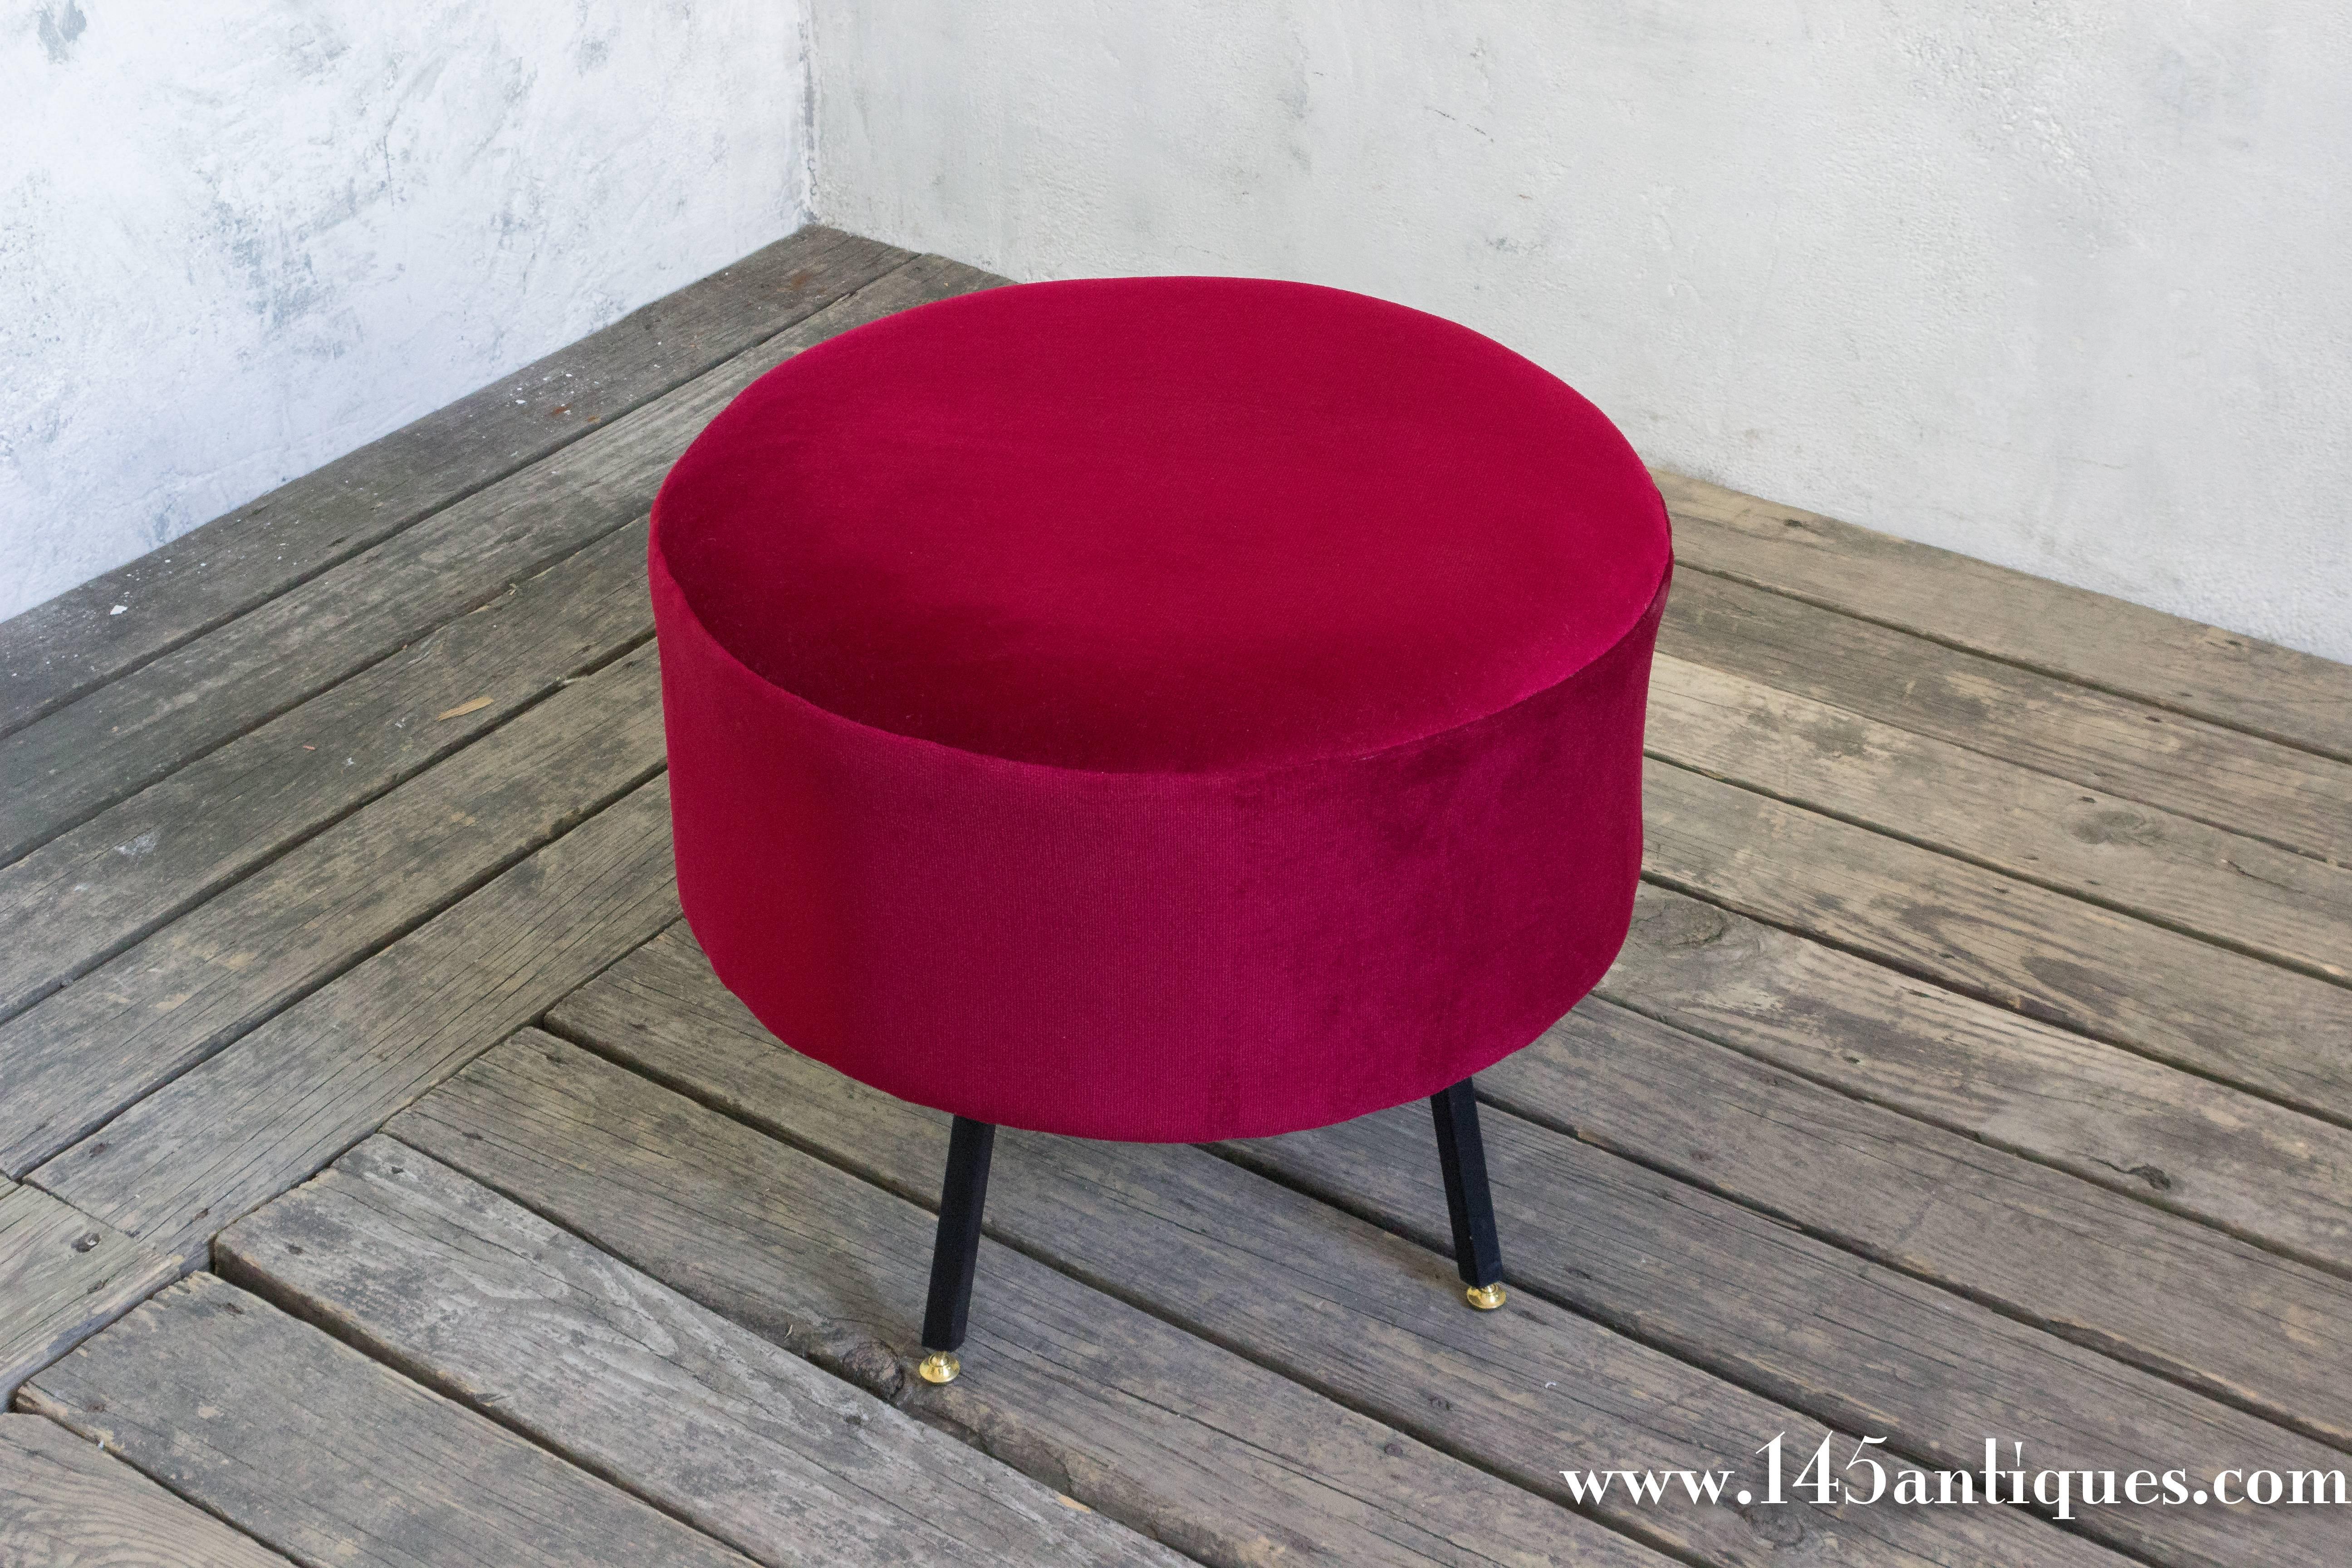 A sleek Italian ottoman in red chenille. Bring a modern flair to your home with this stylish Italian ottoman upholstered in bold red chenille and supported by sleek black metal legs. The contemporary design offers a perfect blend of style and